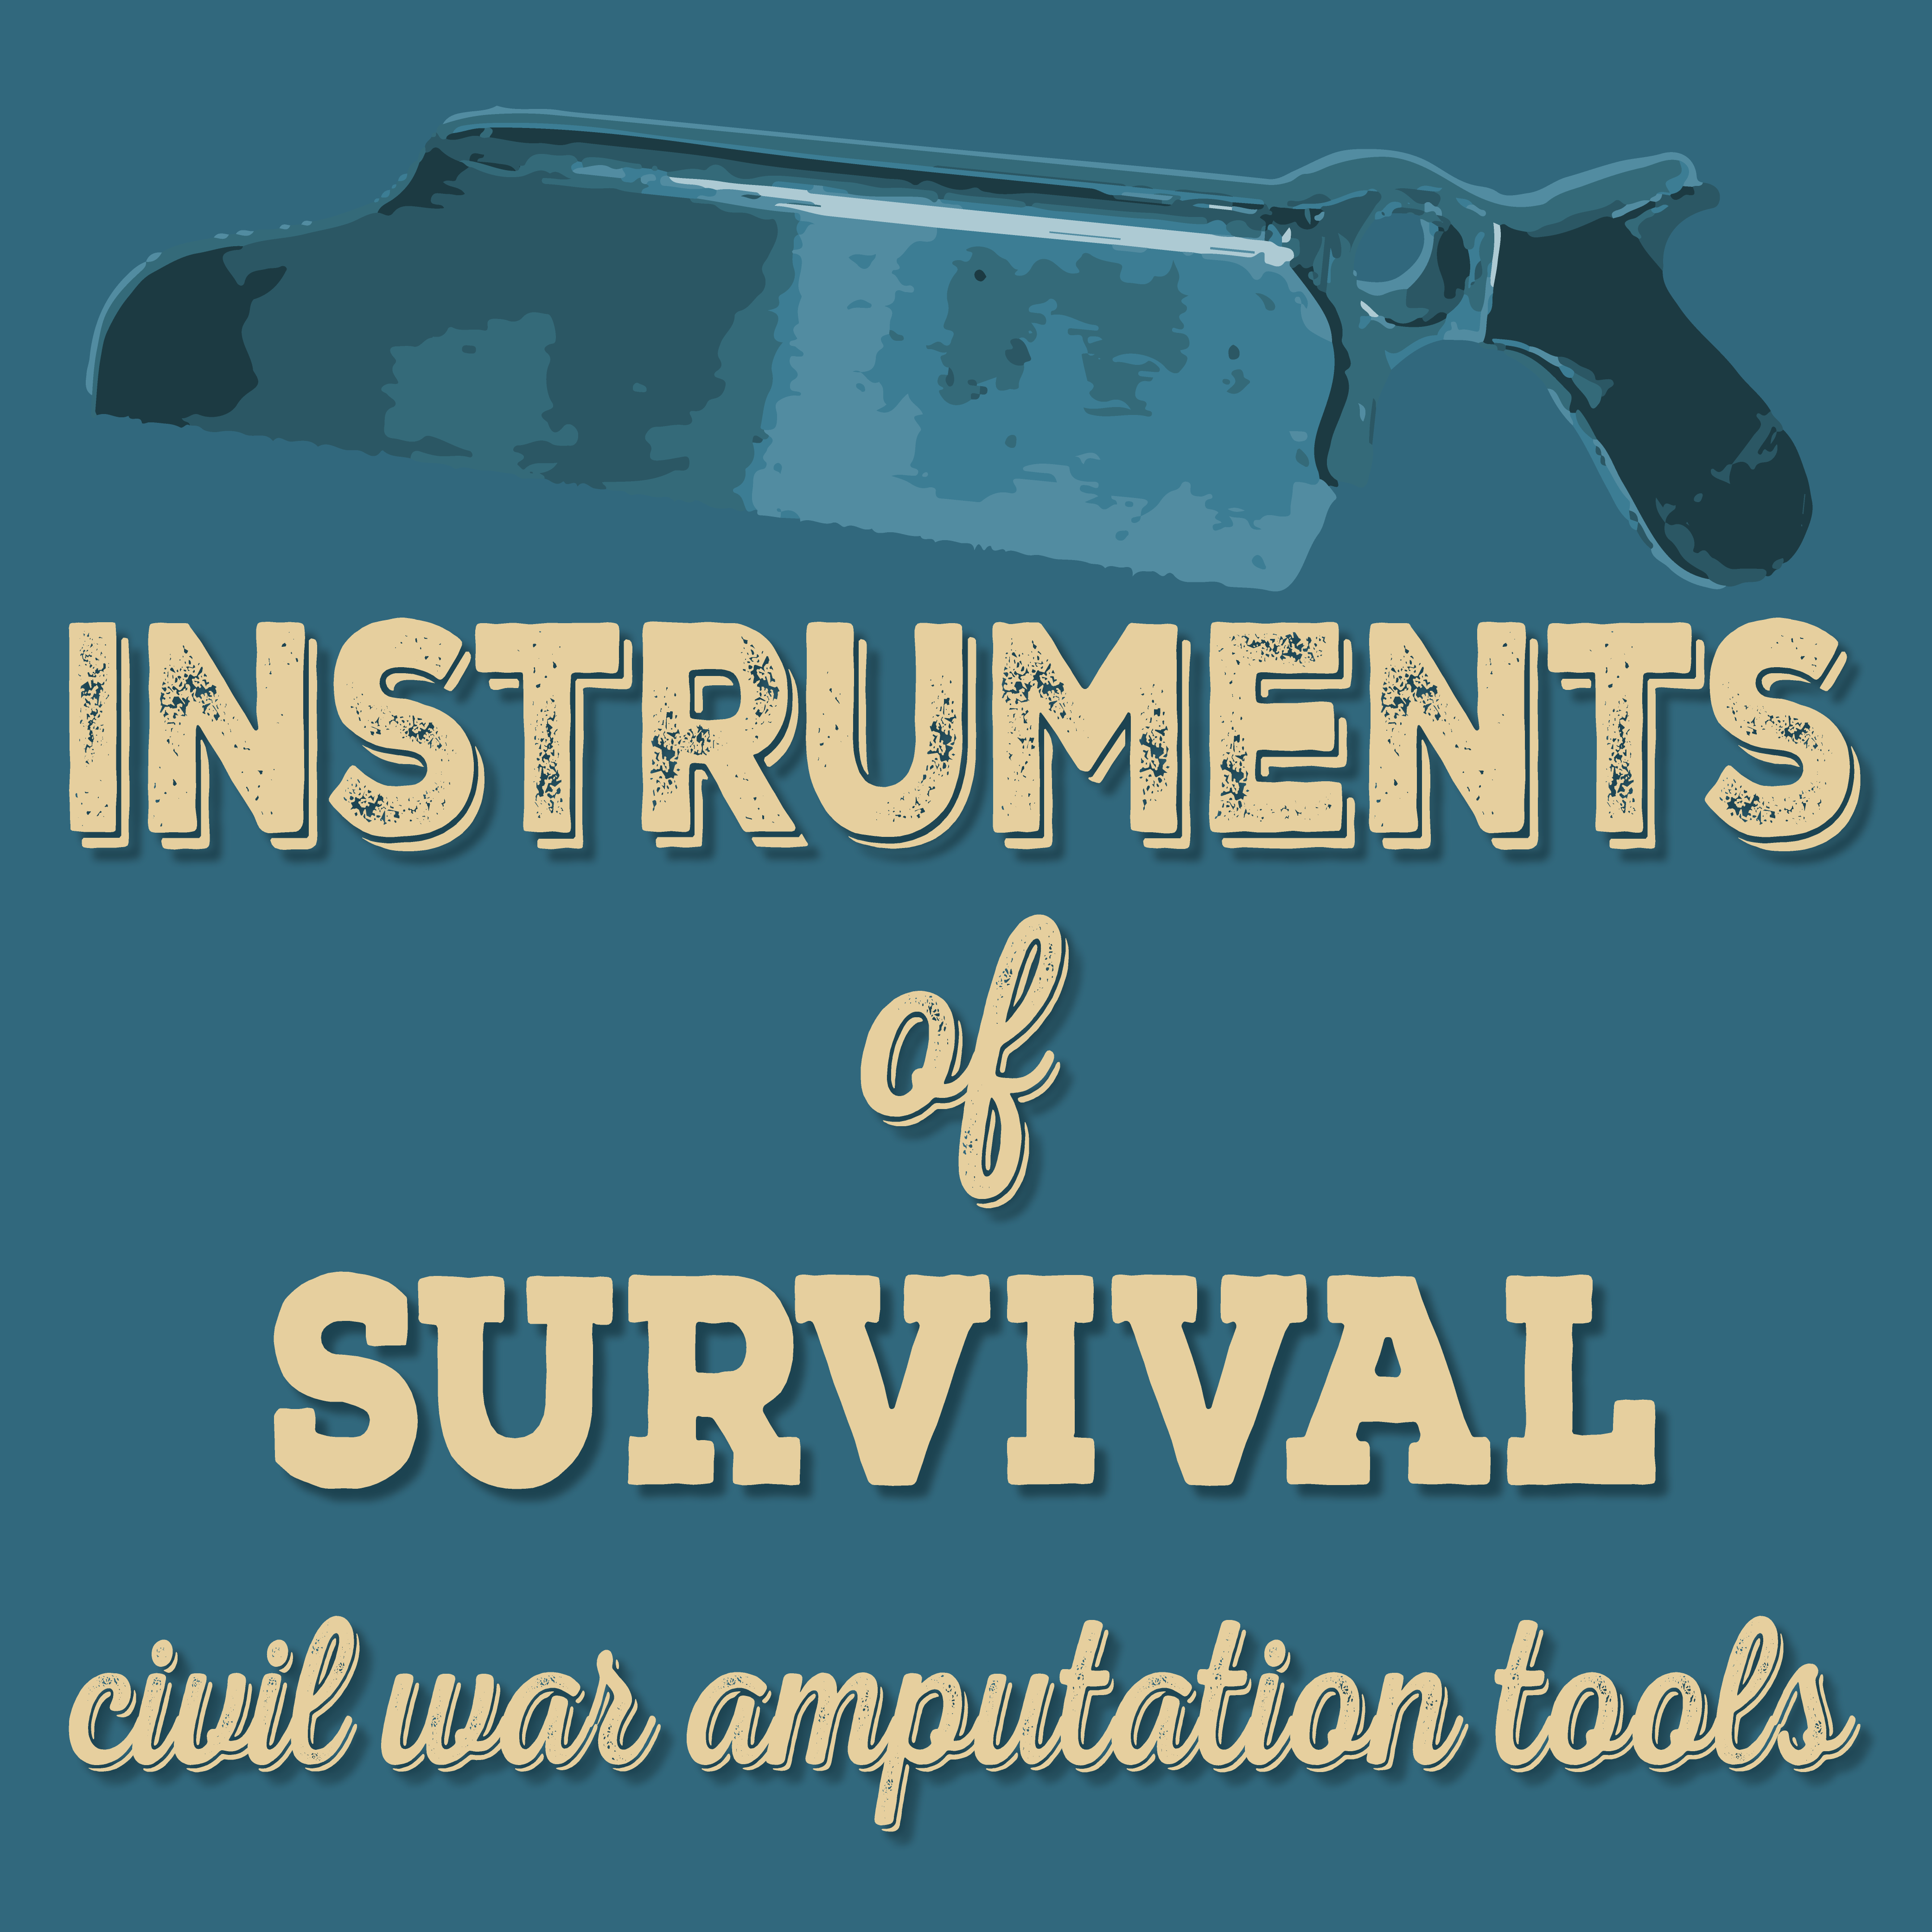 the image shows a half cleaver half gun above the words INSTRUMENTS OF SURVIVAL civil war amputation tools in yellow letters against a blue background